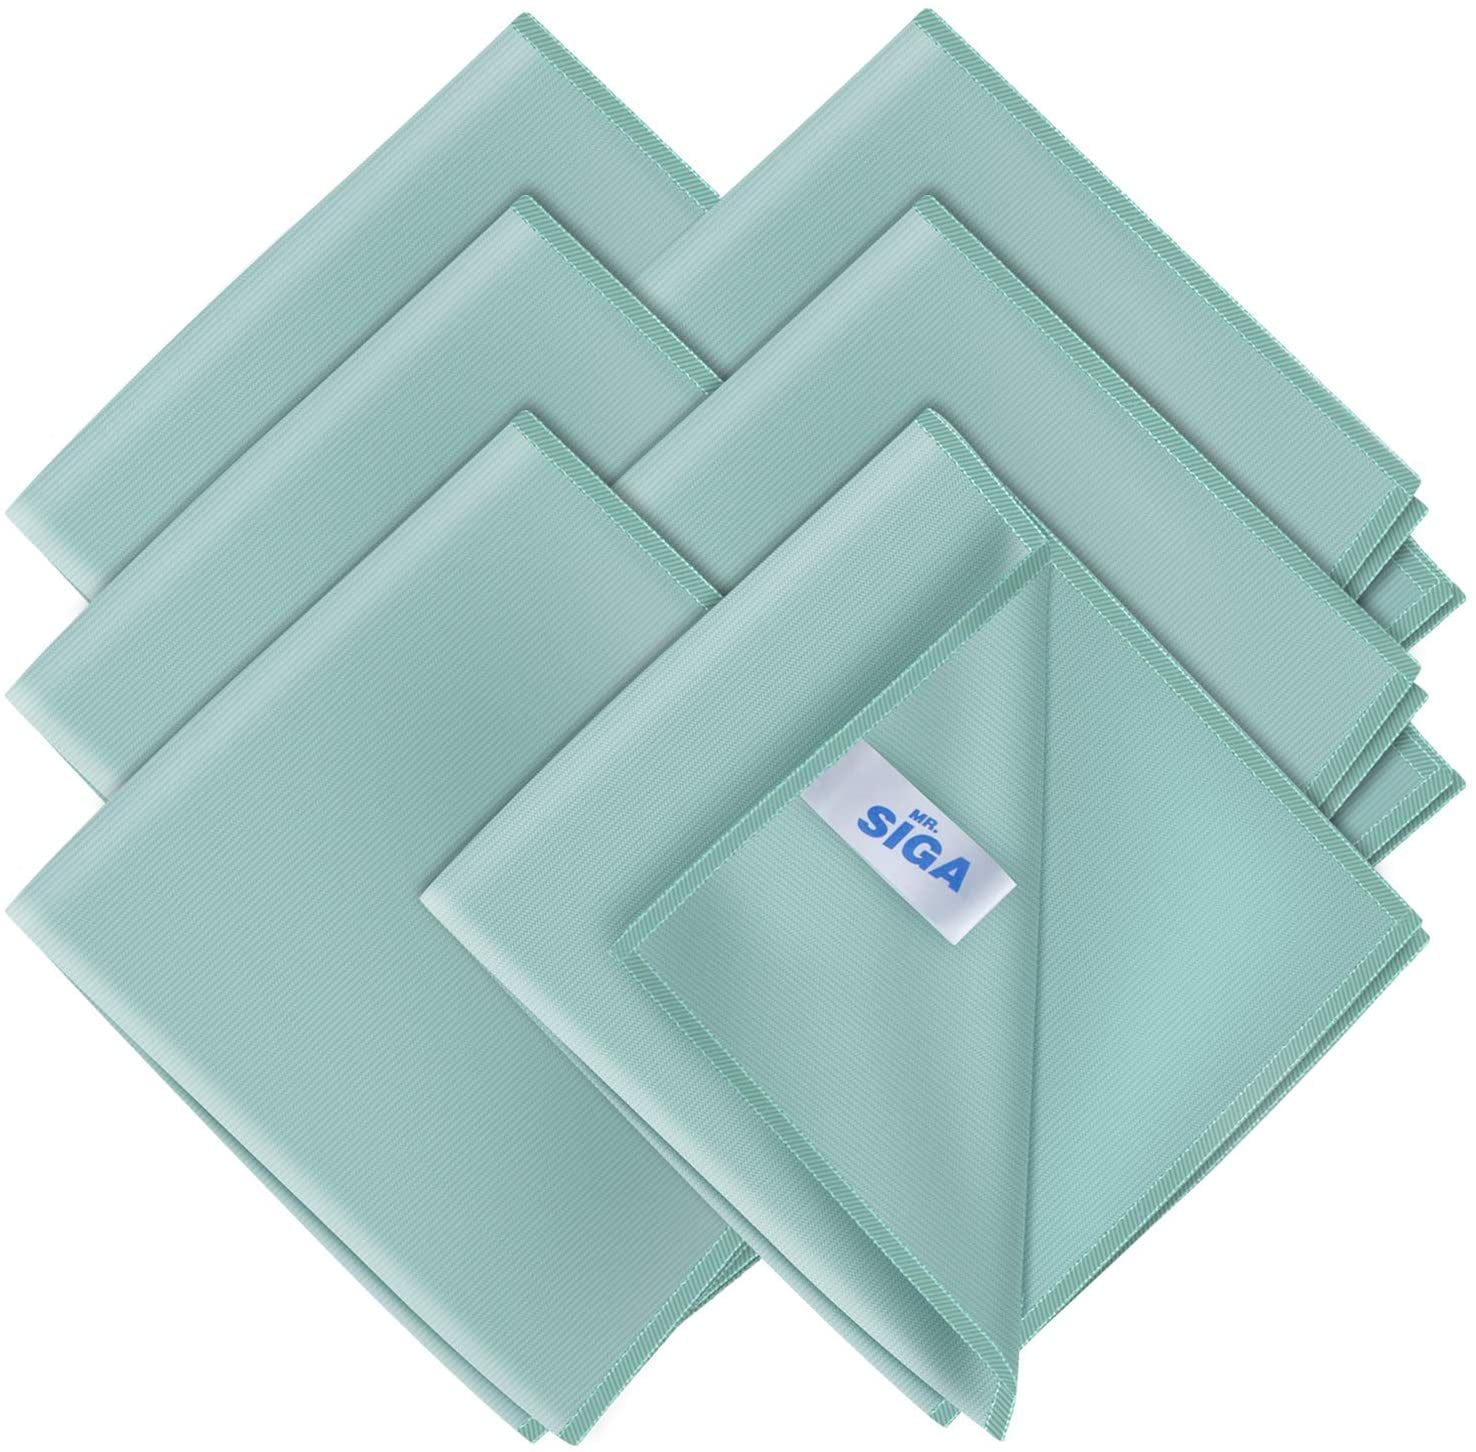 NEW MICROFIBRE SUPER ABSORBENT SOFT GLASS CLEANING 40 x 40CM HOME USAGE CLOTHS 